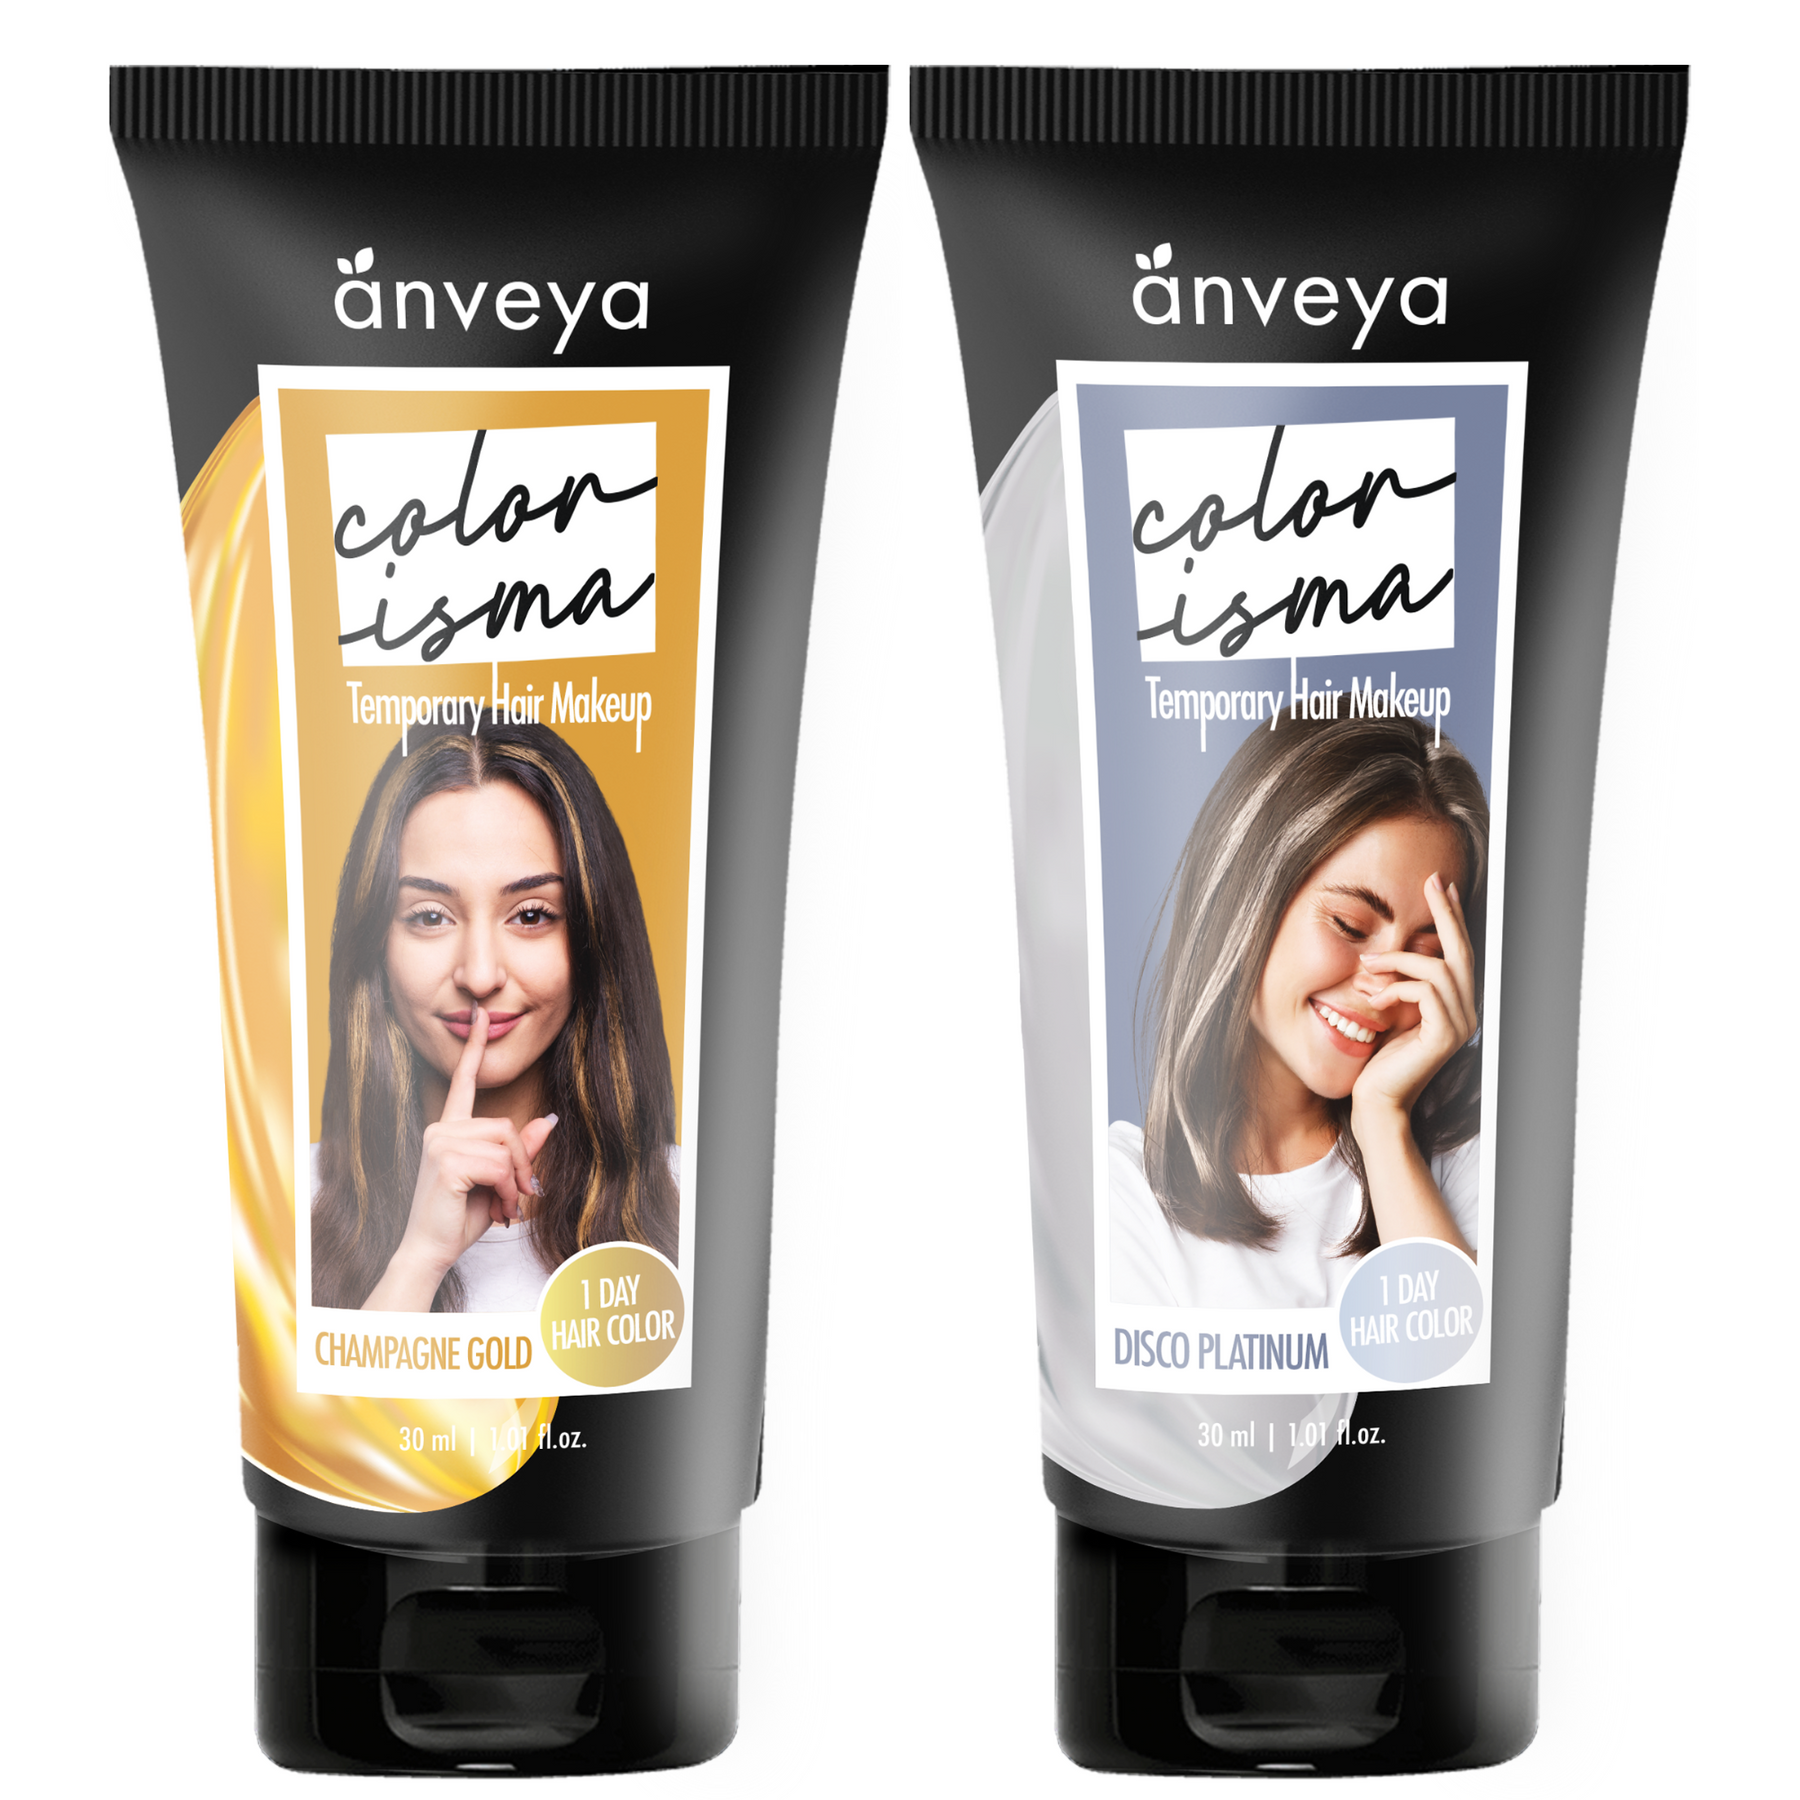 Anveya Colorisma Champagne Gold and Disco Platinum Temporary Hair Color, 30ml Each